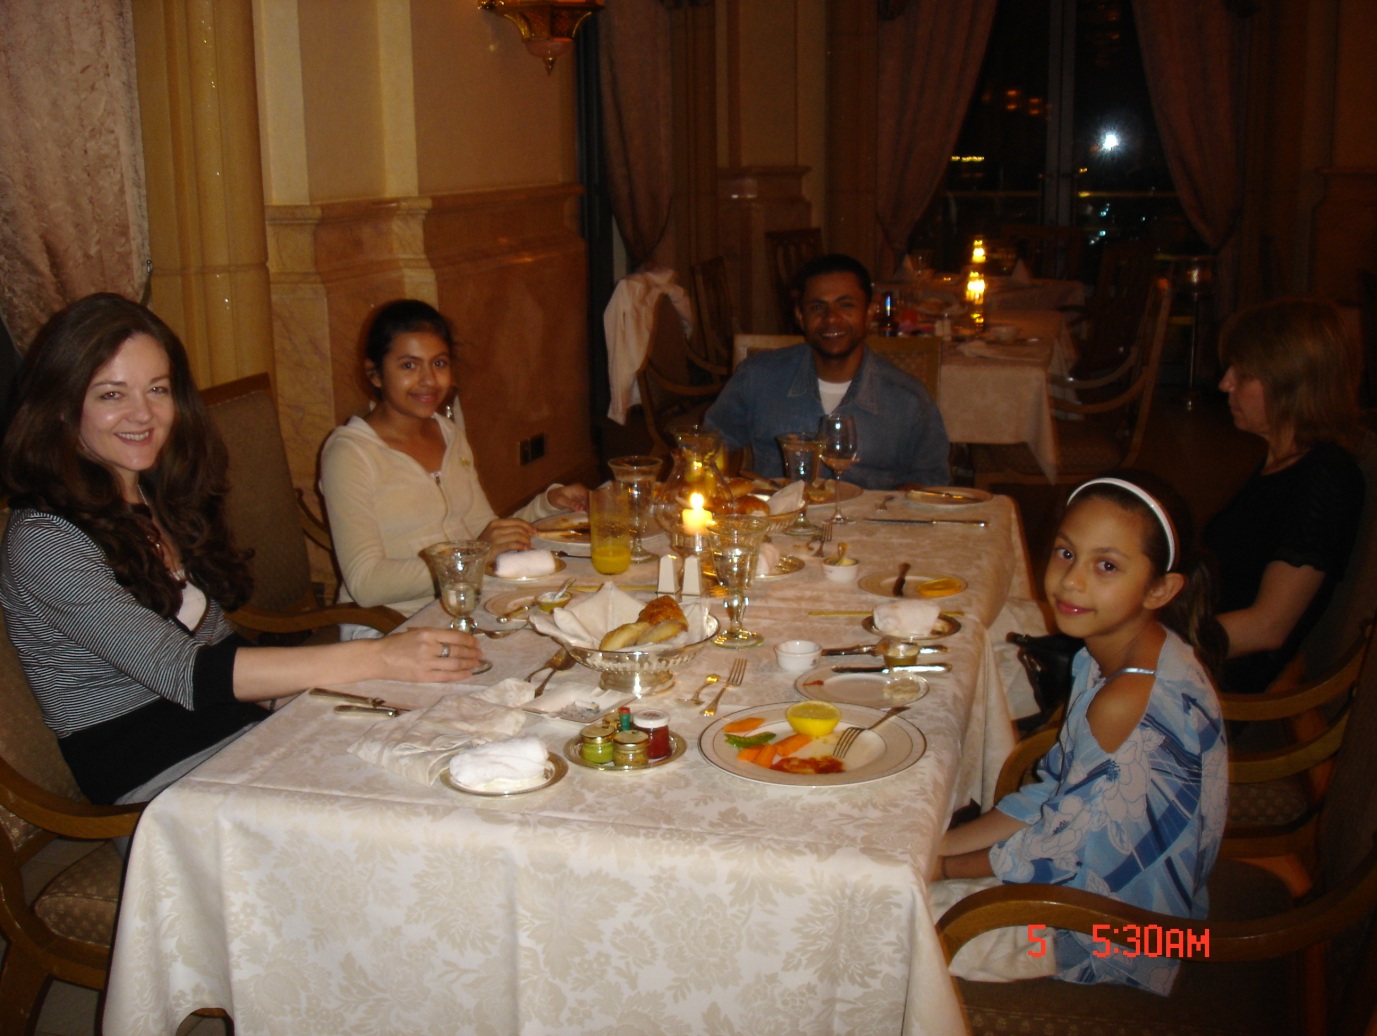 luxury dinner in emirates palace with limousine by fame lifestyle